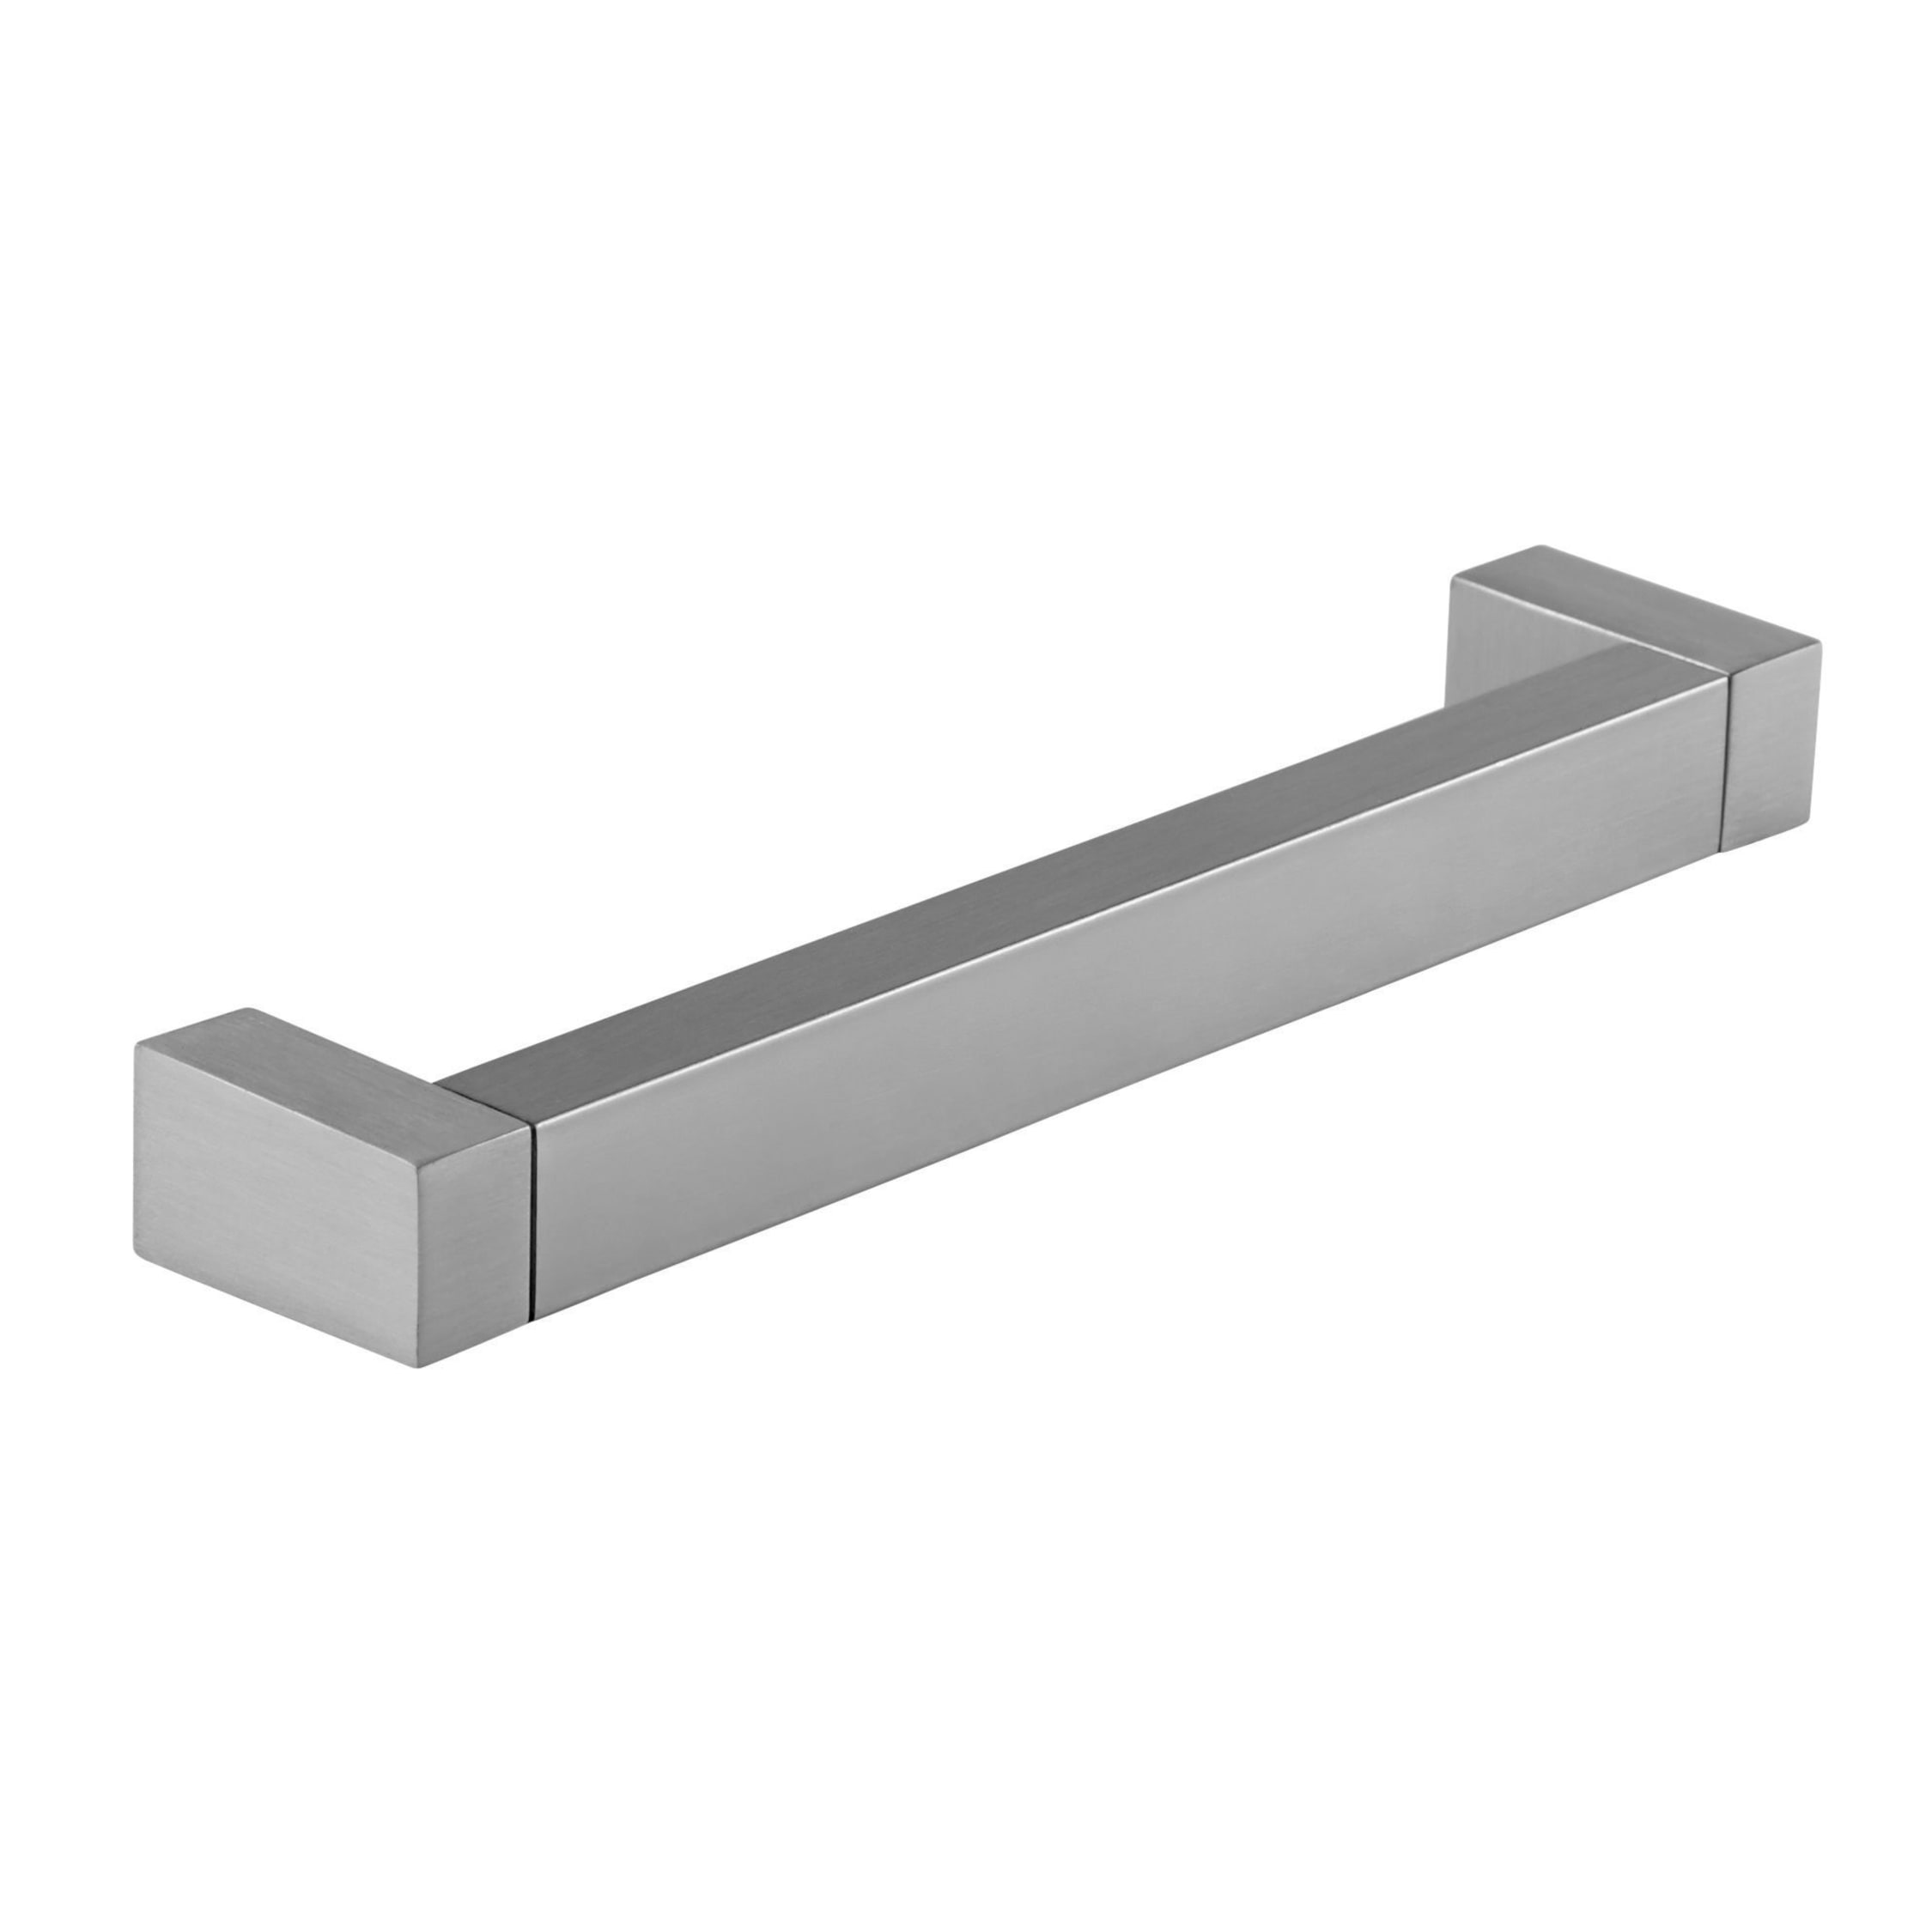 H09 Brand New! 1 X Wickes Kitchen Square D Handle Stainless Steel 288mm 